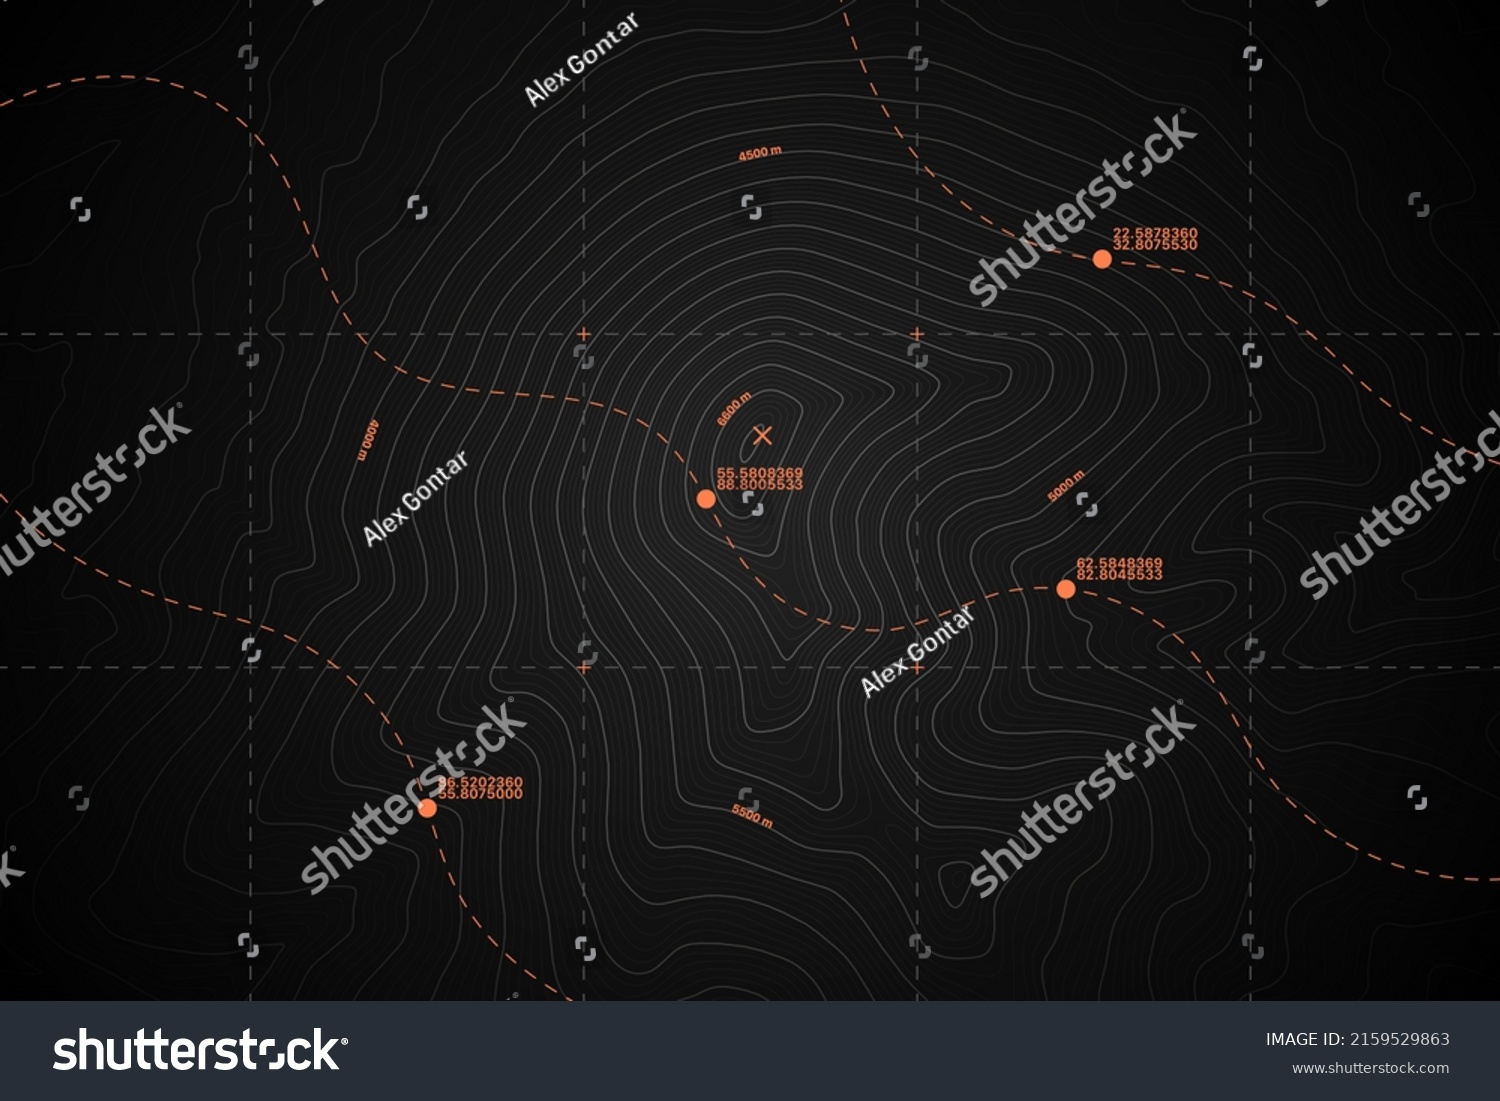 SVG of Vector Modern Dark Grey Topography Contour Map With Relief Elevation. Geographic Terrain Area Satellite View Digital Cartographic UI. Mountains Hiking Route Coordinates Abstract Illustration svg